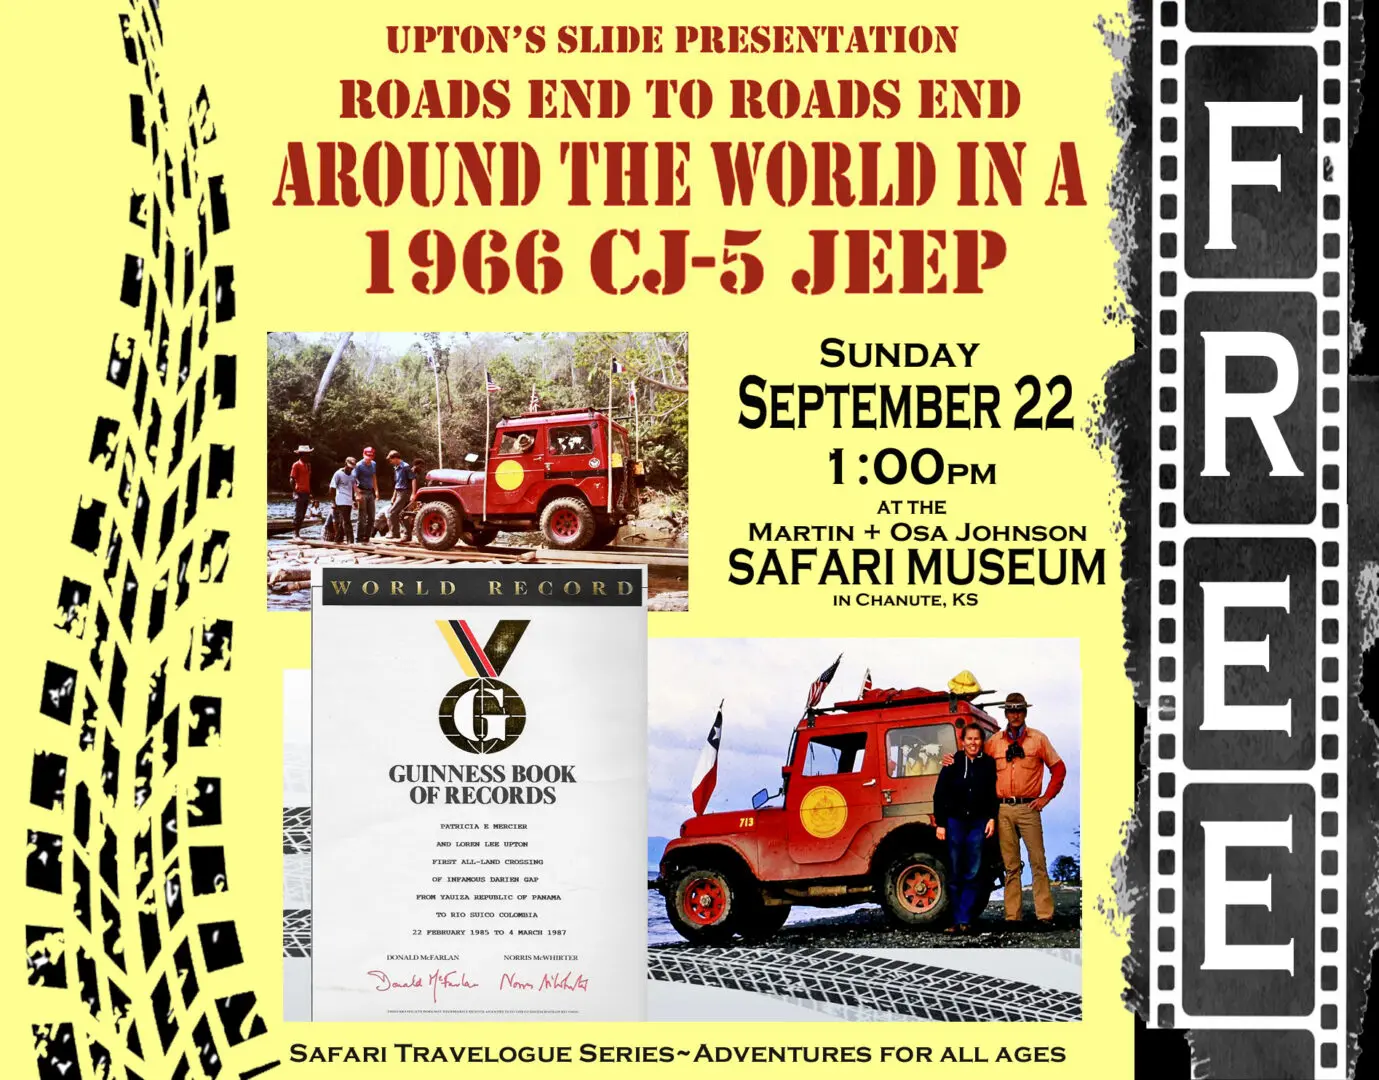 Patty Upton Slide show flyer Jeep Sand Ship FREE travelogue with tire track